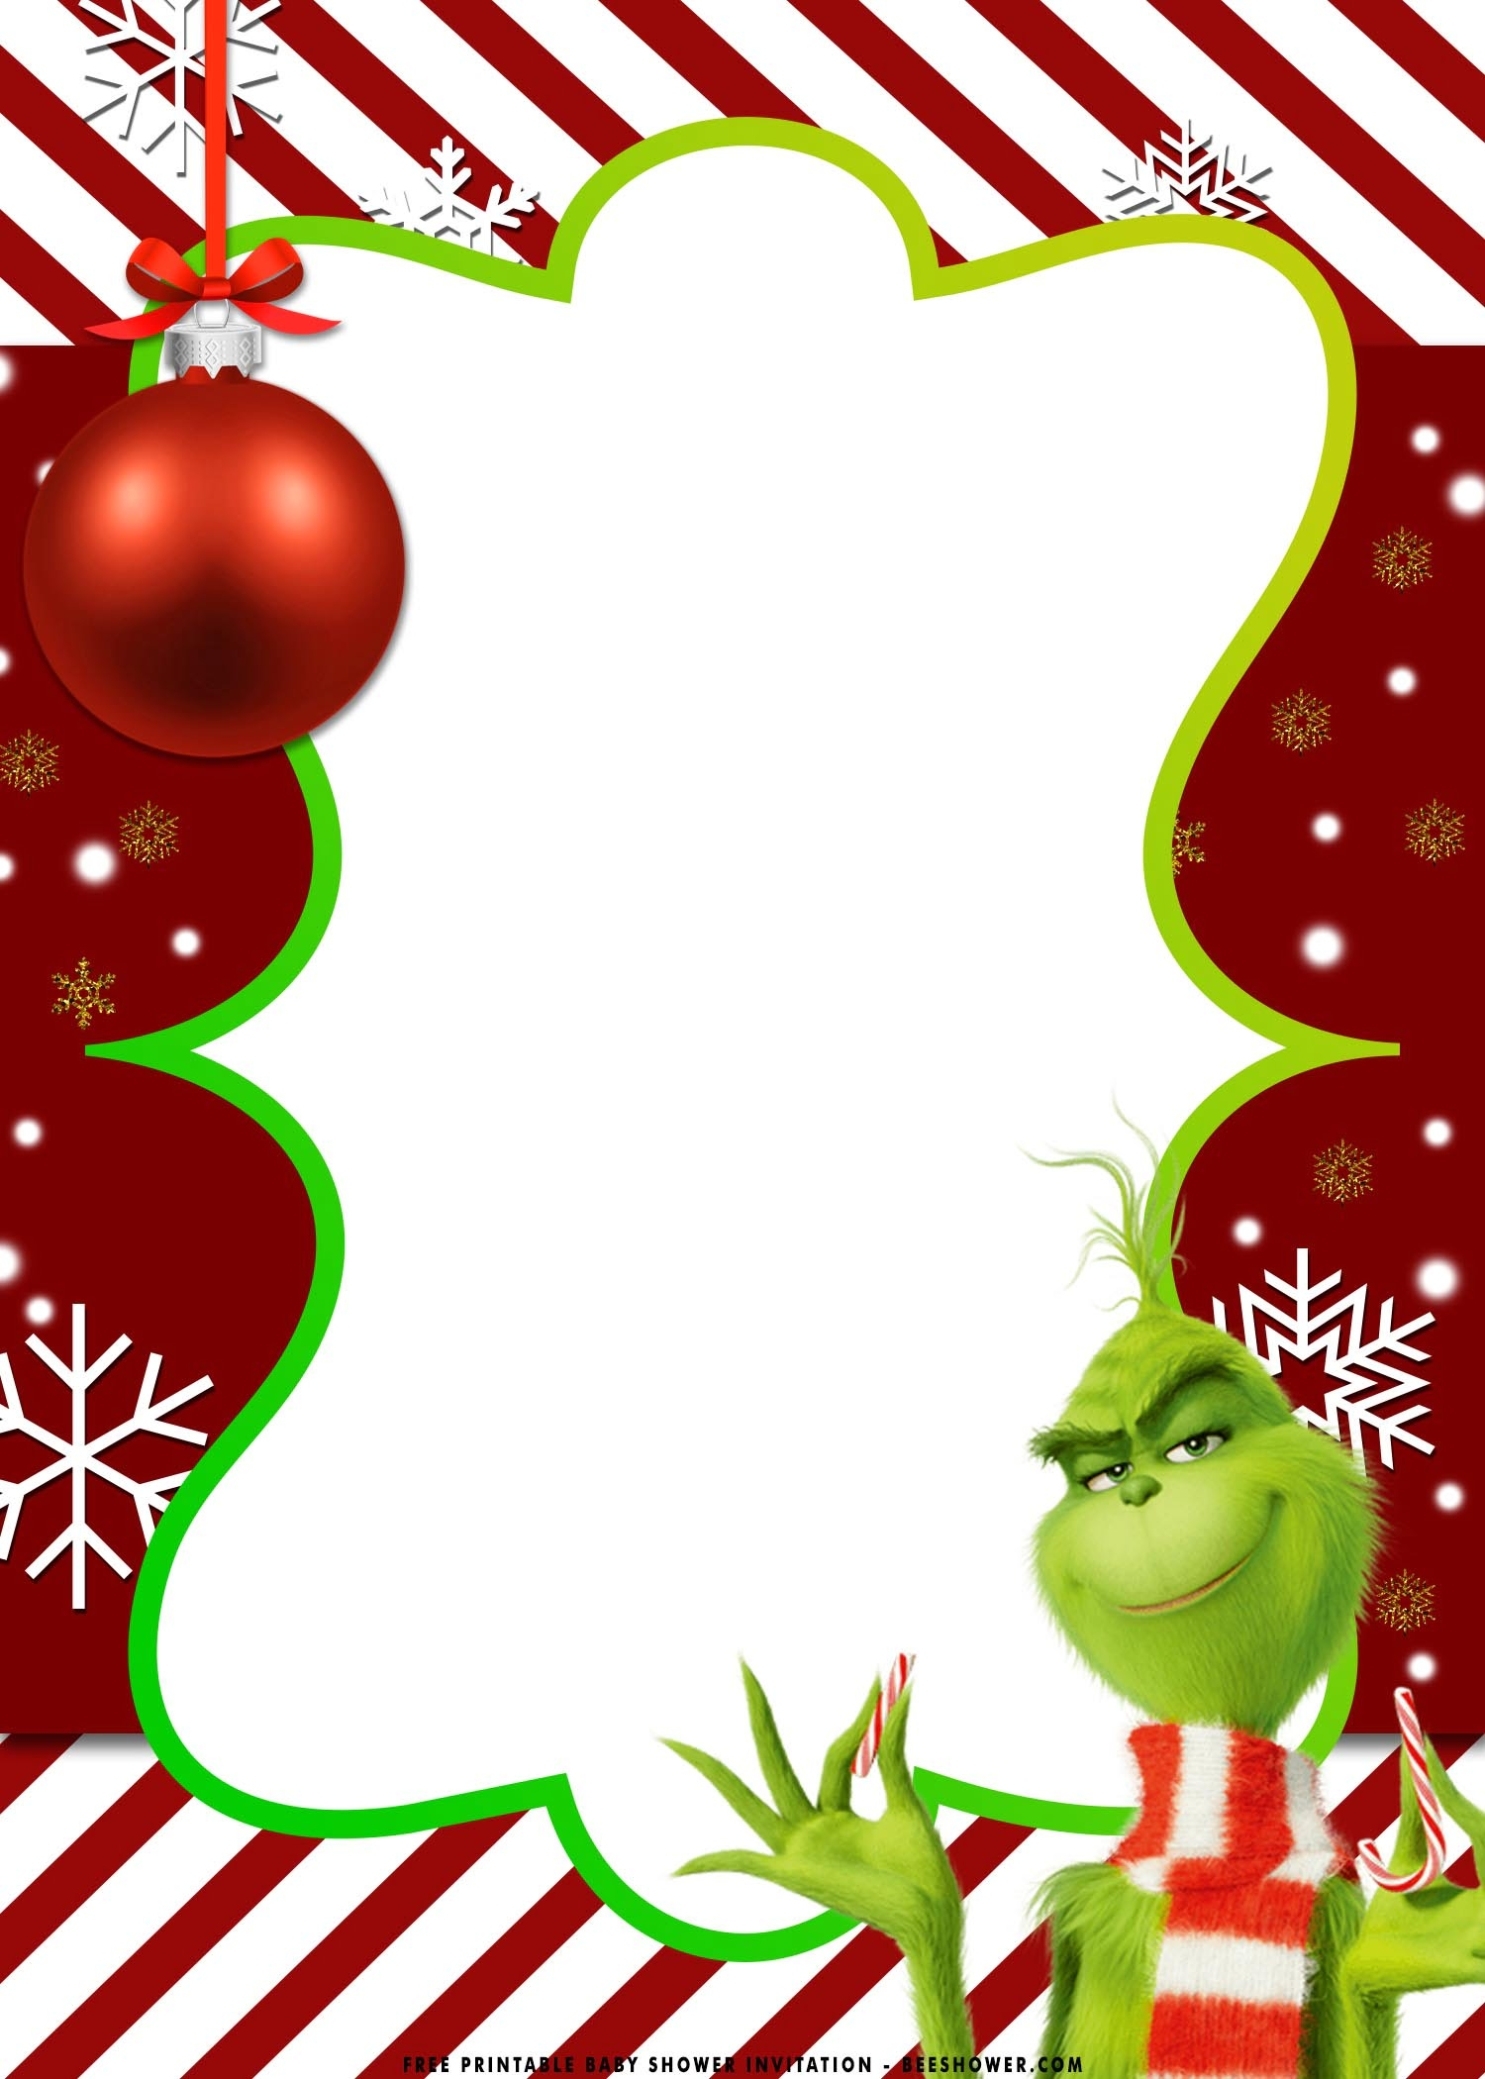 (Free Printable) - Christmas Grinch Baby Shower Invitation Templates | Free Printable Baby throughout Printable Holiday Card Templates